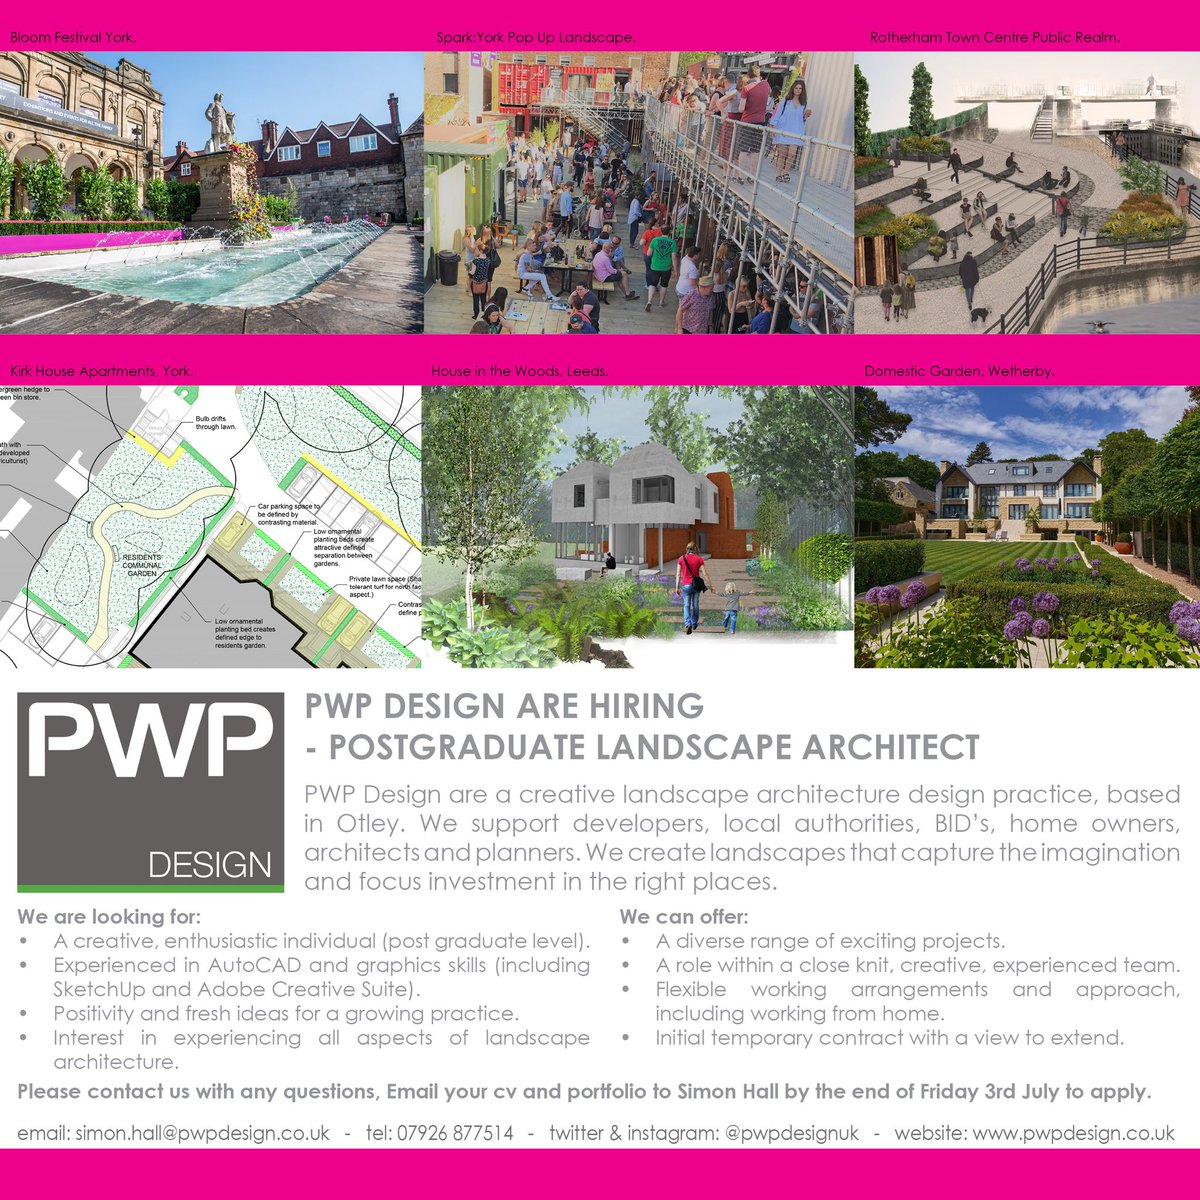 PWP Design are hiring. We are looking for a creative postgraduate landscape architect to join our team. #chooselandscape #landscapearchitecture #Yorkshire #landscapedesign